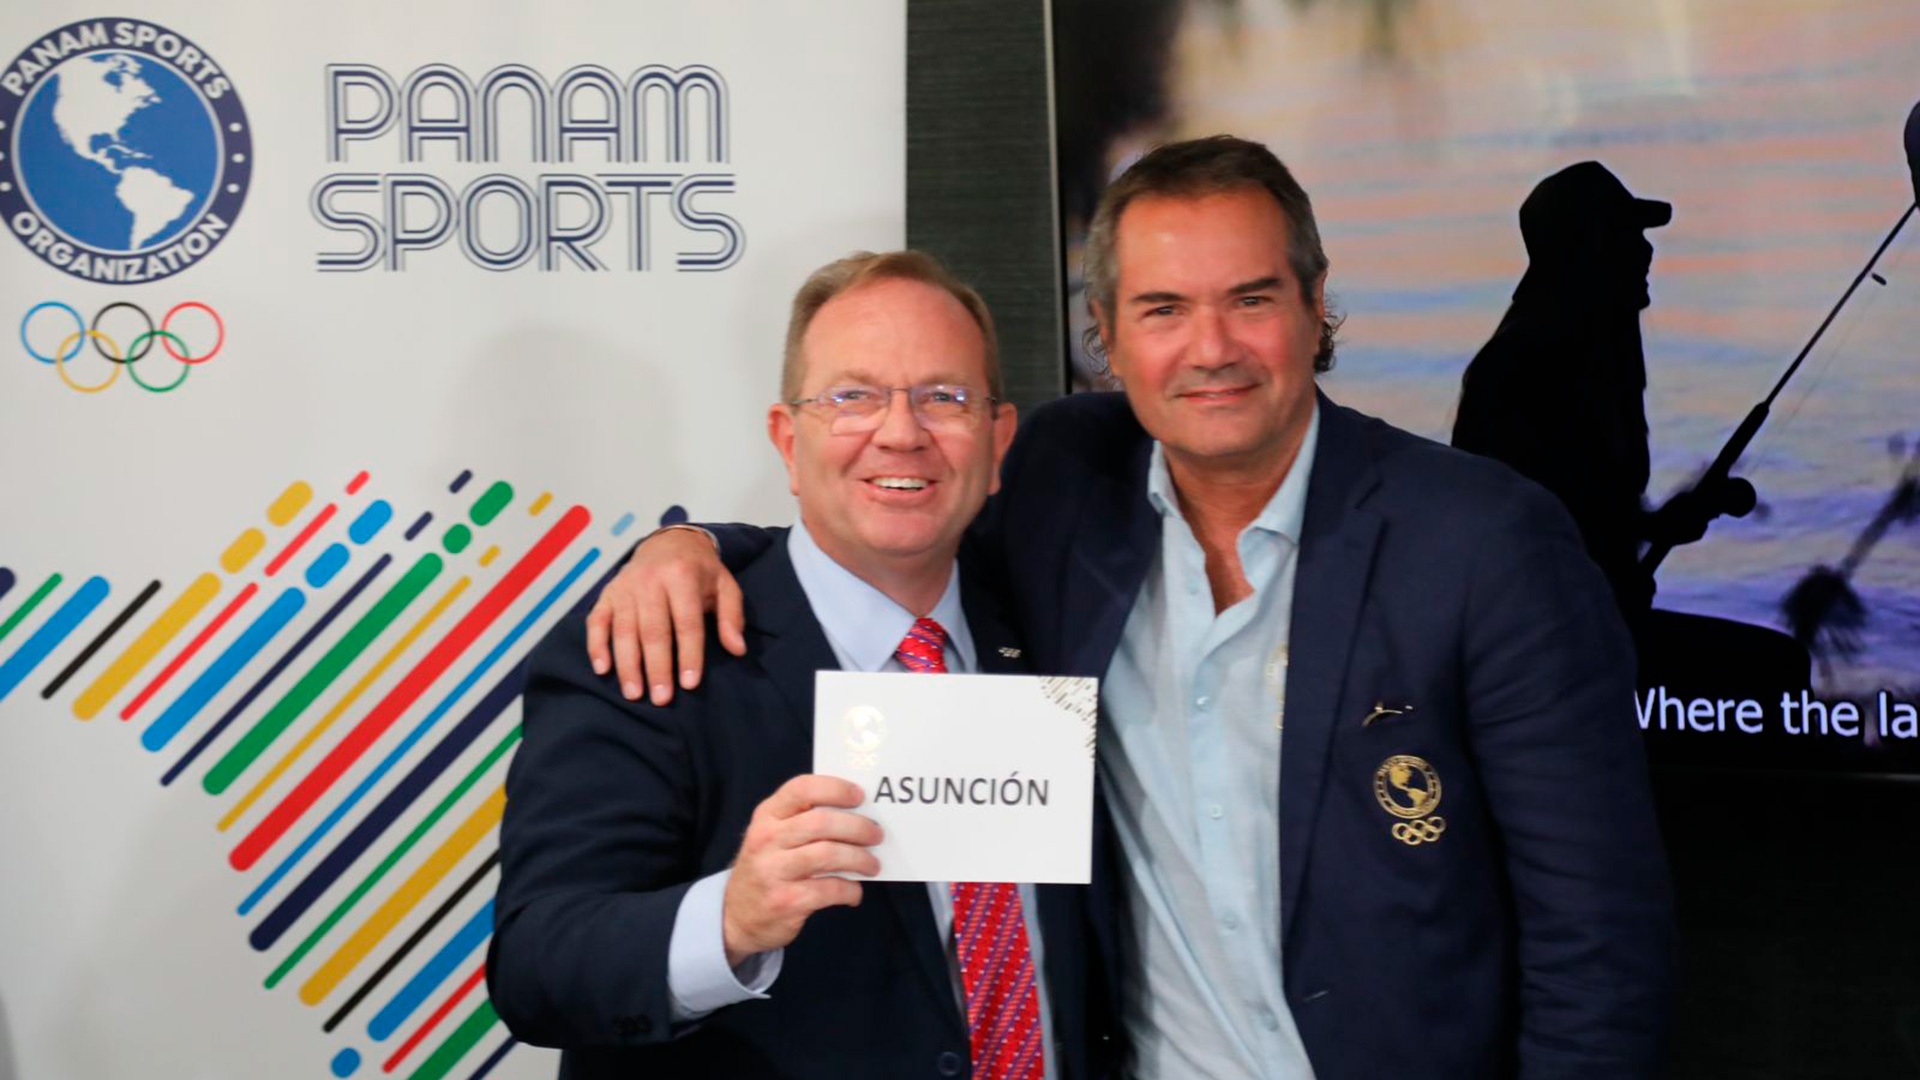 After the good performance hosting the 2022 South American Games, Asunción will host the 2025 Junior Pan American Games